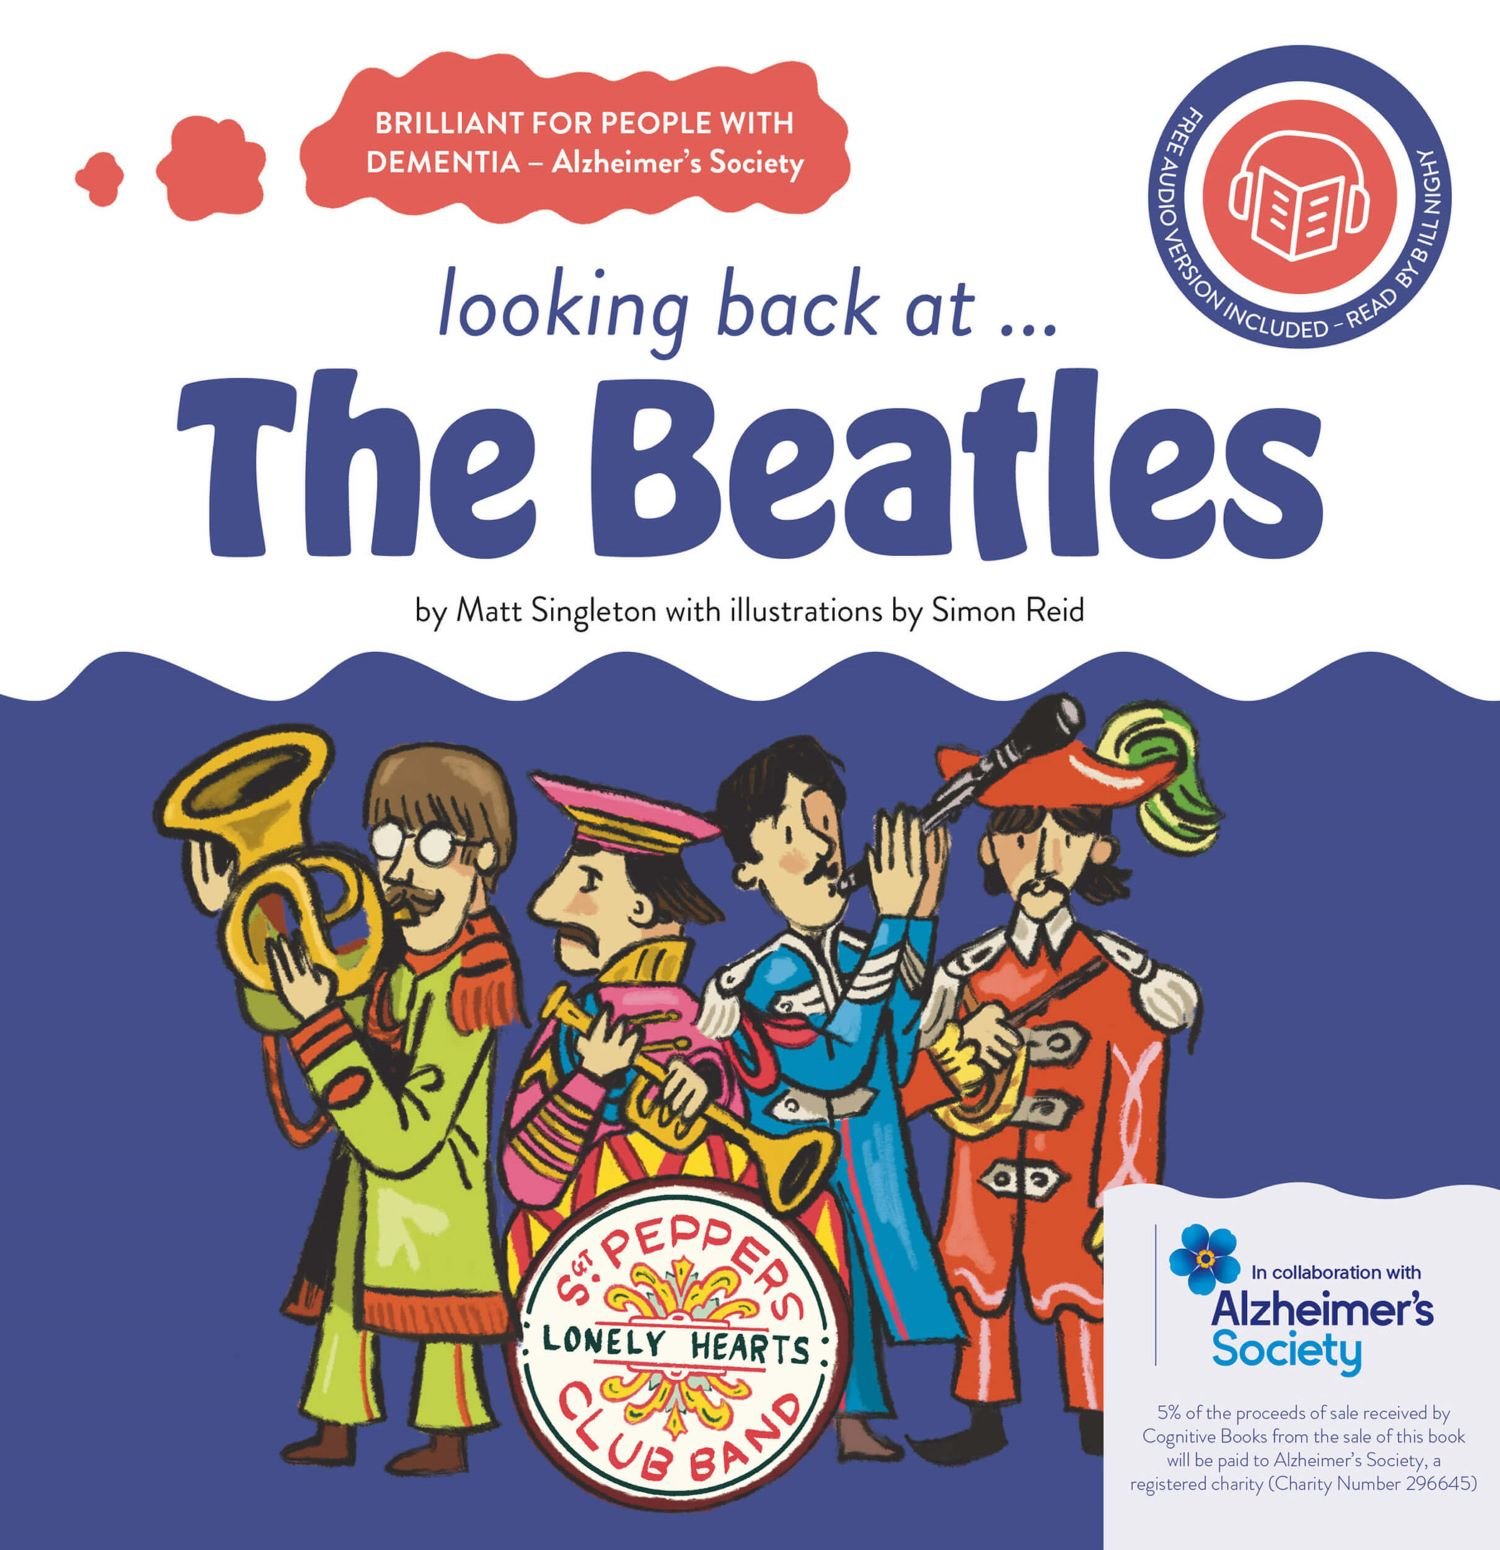 looking-back-on-...-The-Beatles-Cover-Cognitive-Books.jpg